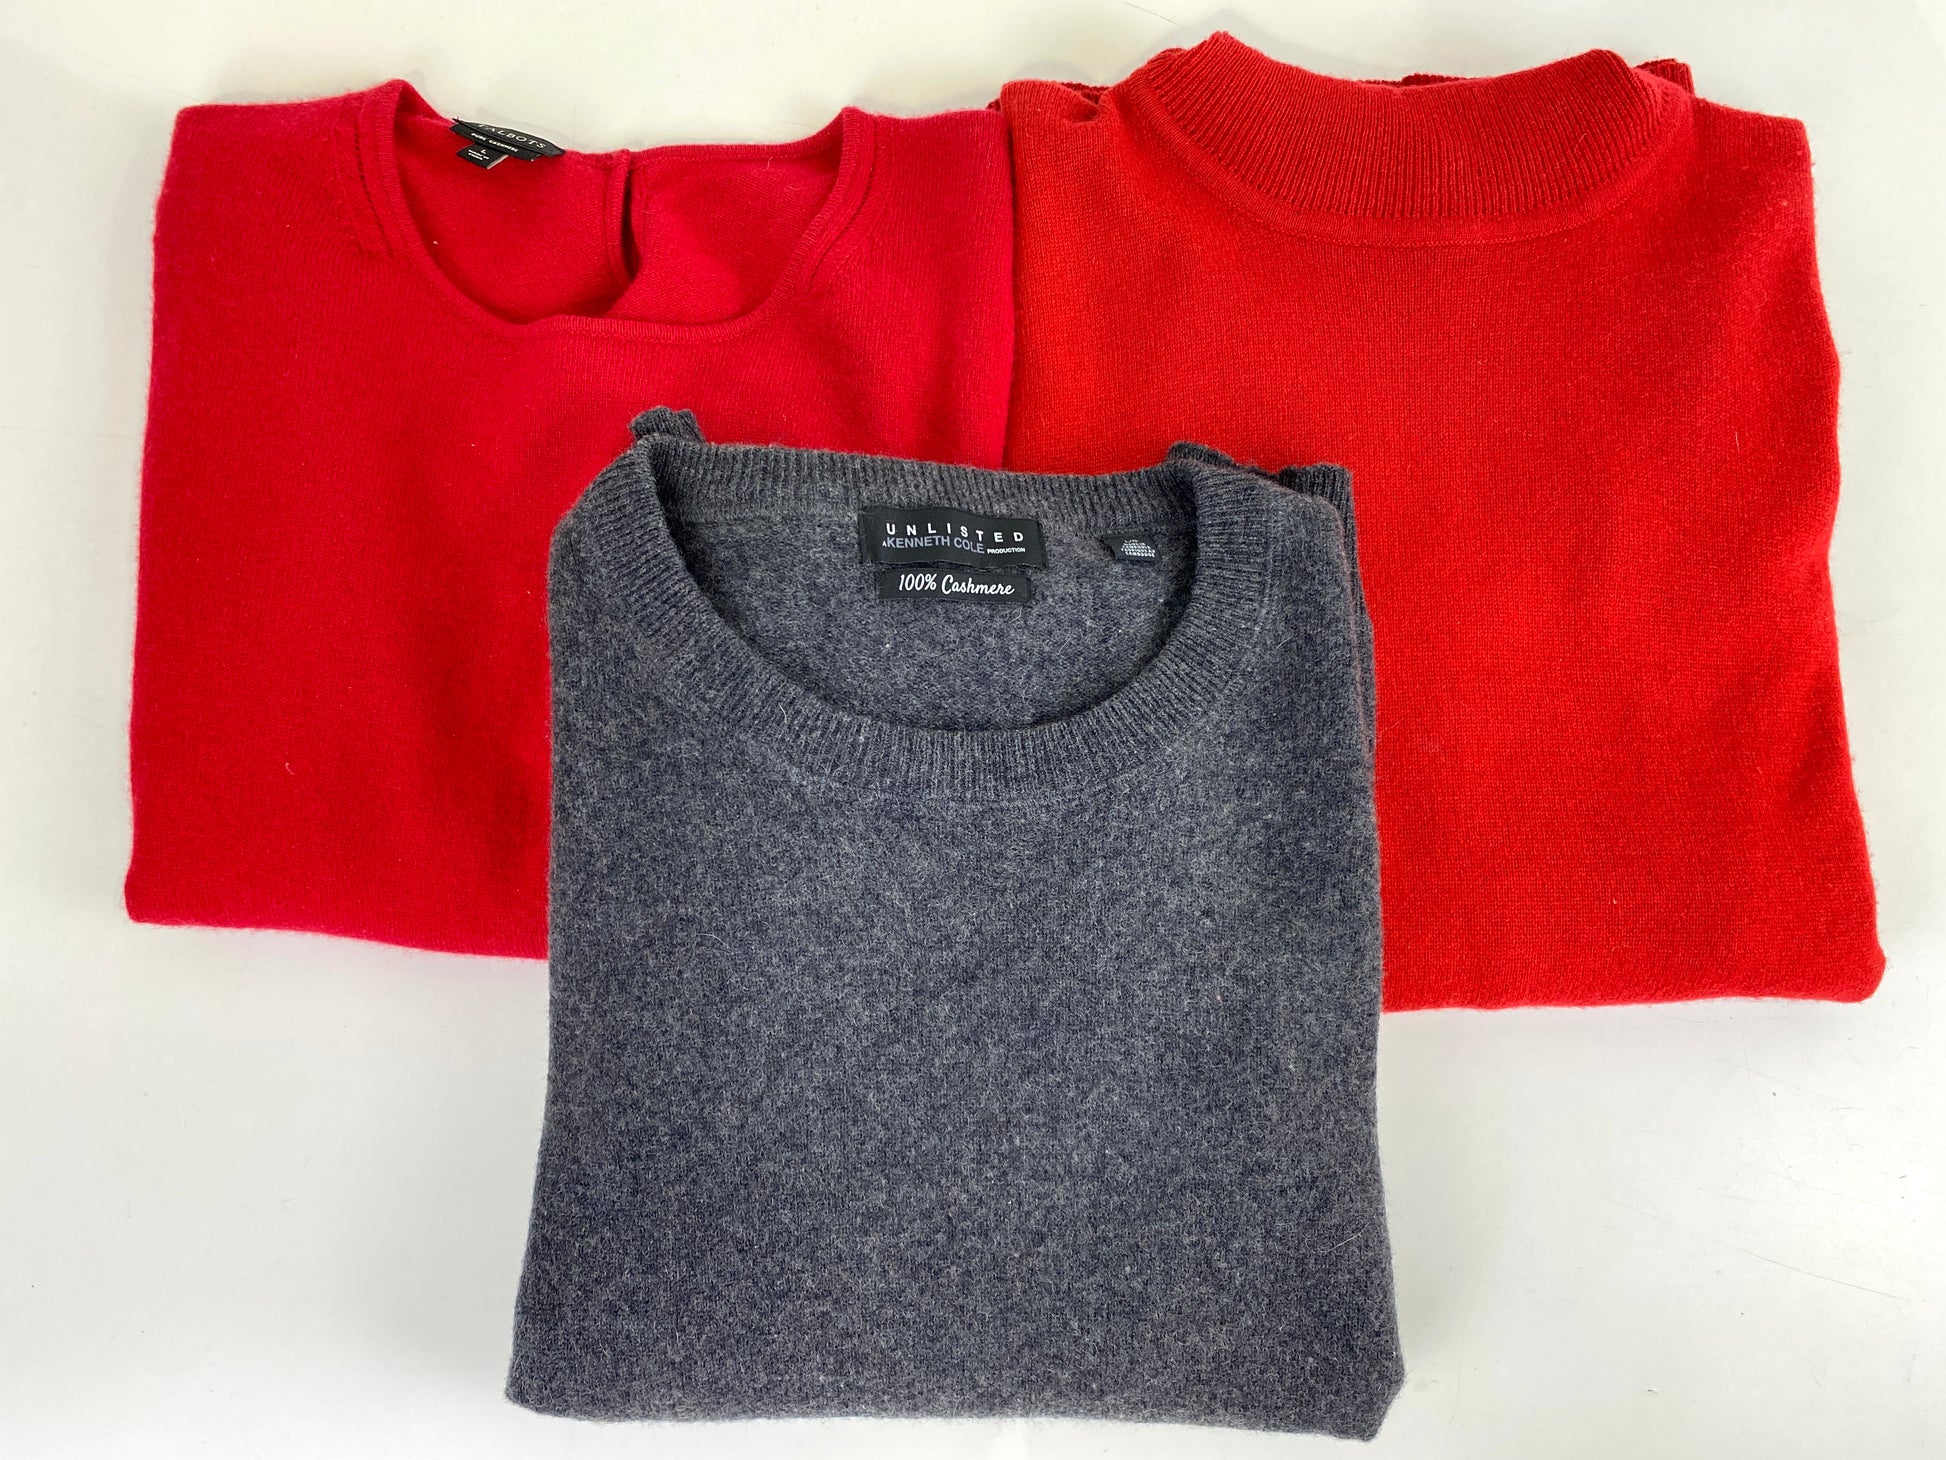 3 cashmere sweaters folded on table. 1 grey and 2 red. Ian Drummond Vintage. 